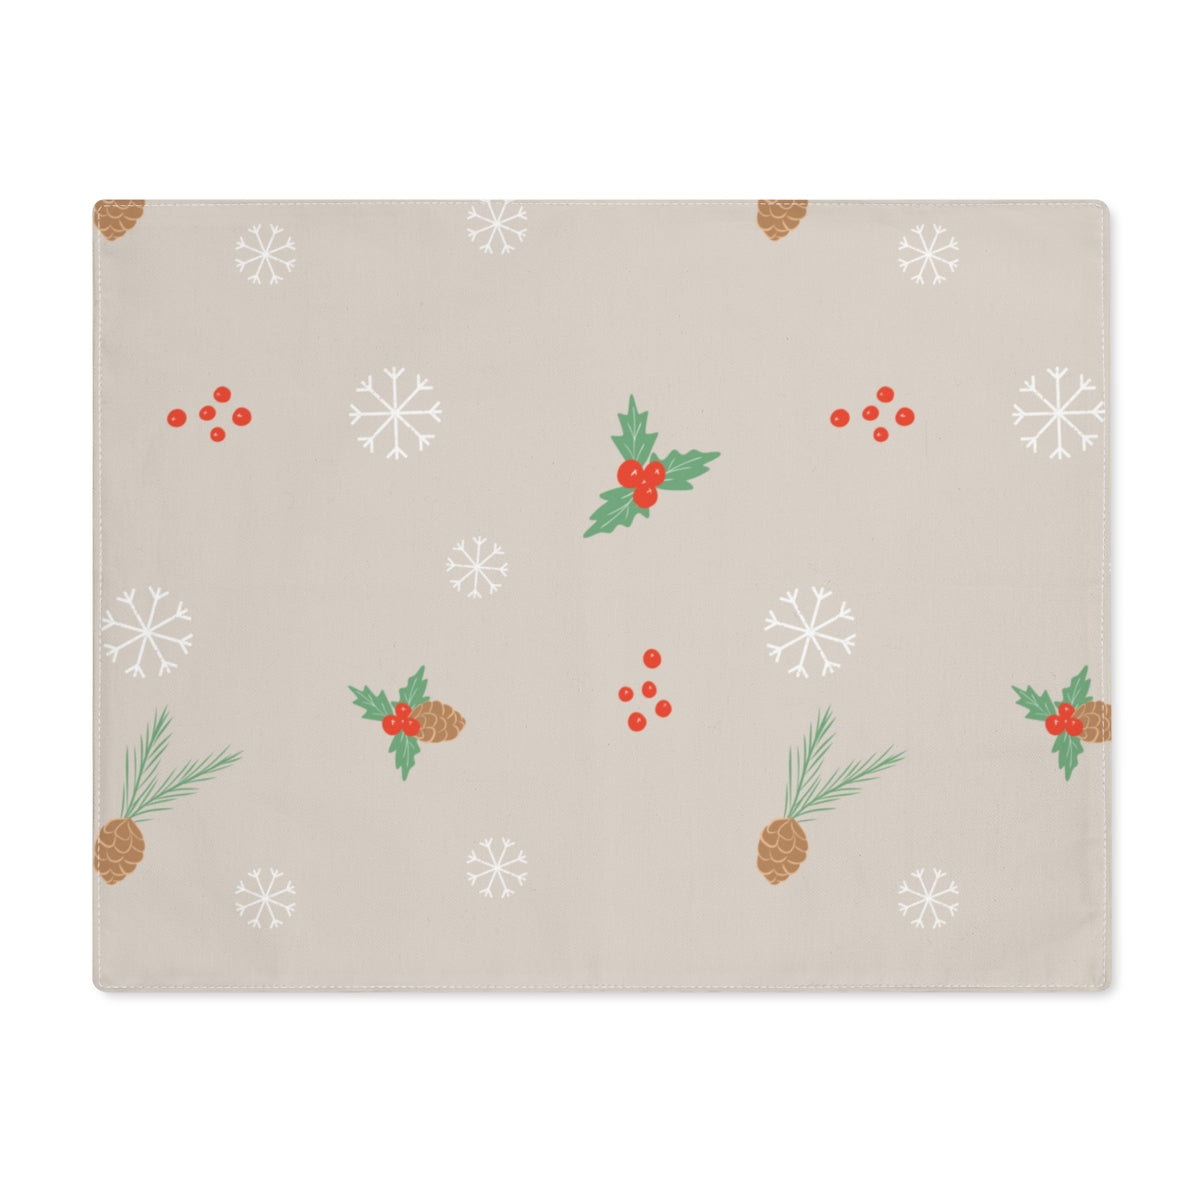 Holiday Table Placemat - Pinecones & Snowflakes